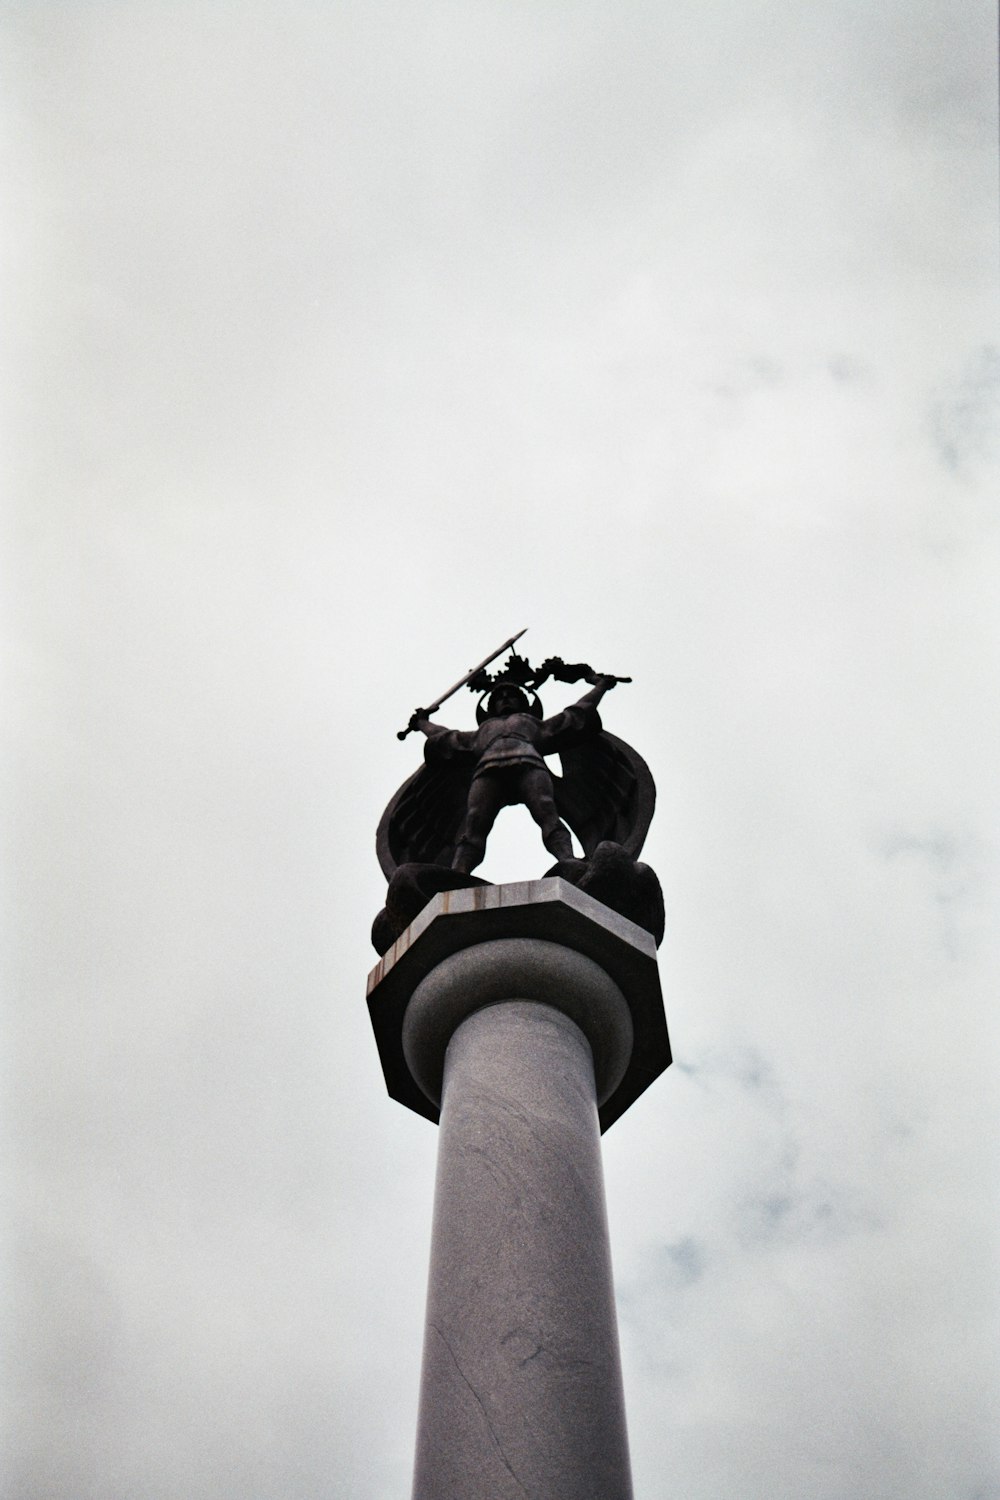 a statue on top of a pole with a sky background